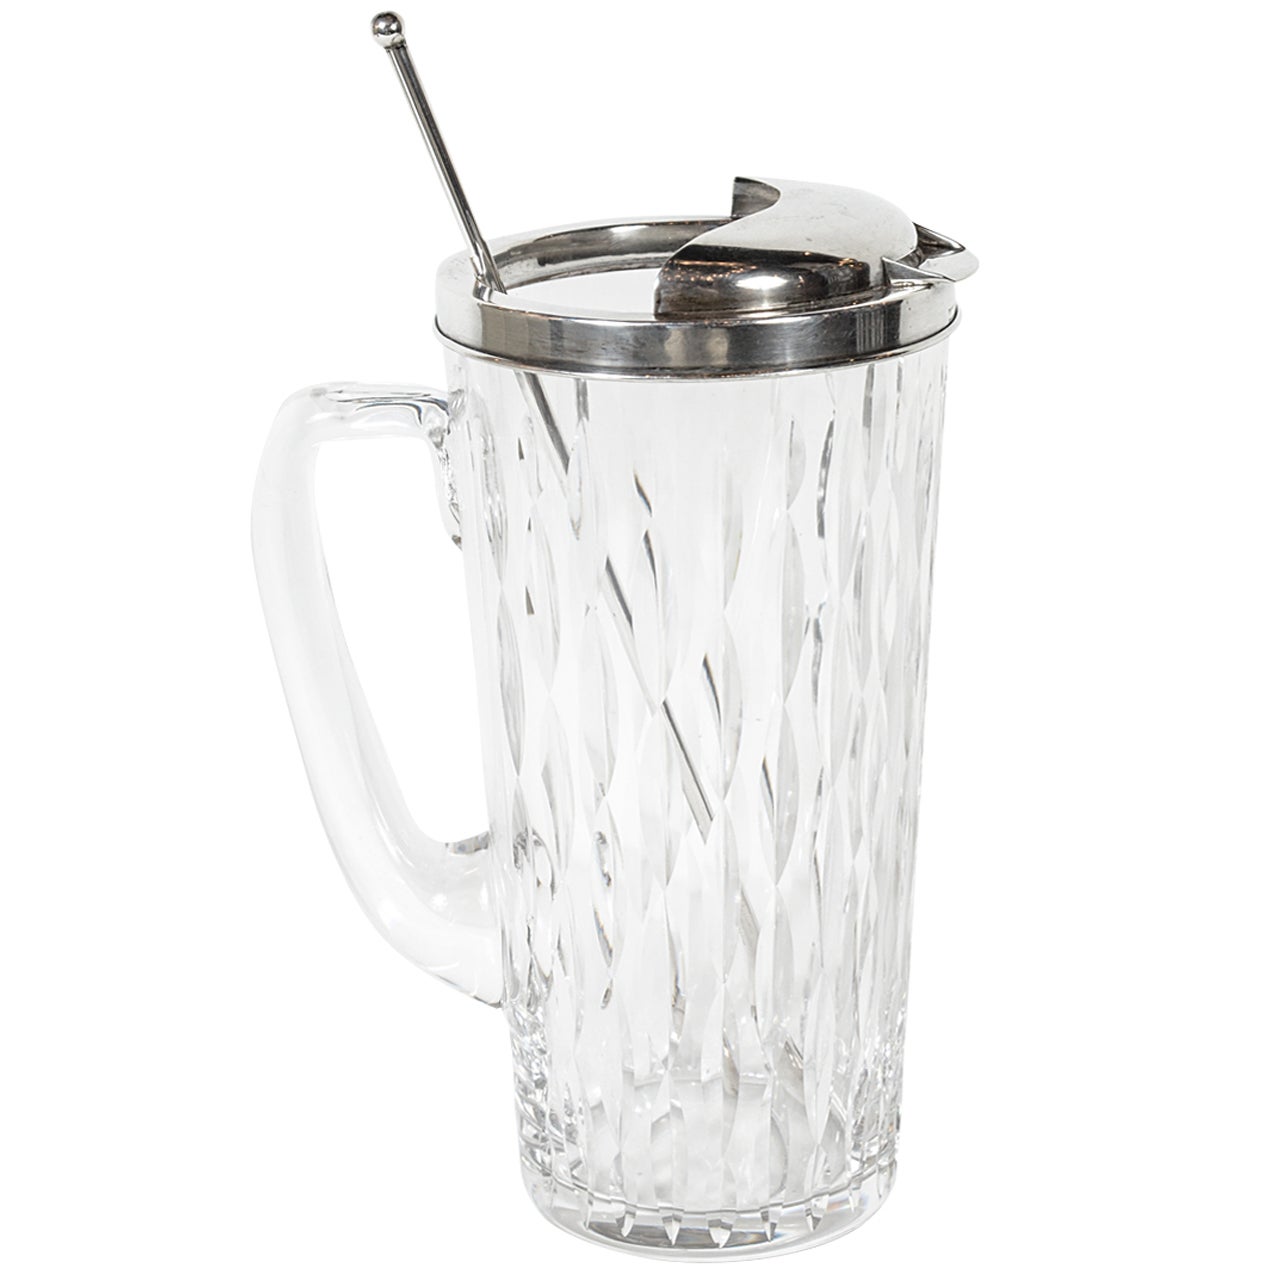 Glamorous Mid-Century Crystal and Sterling Silver Pitcher by Tiffany